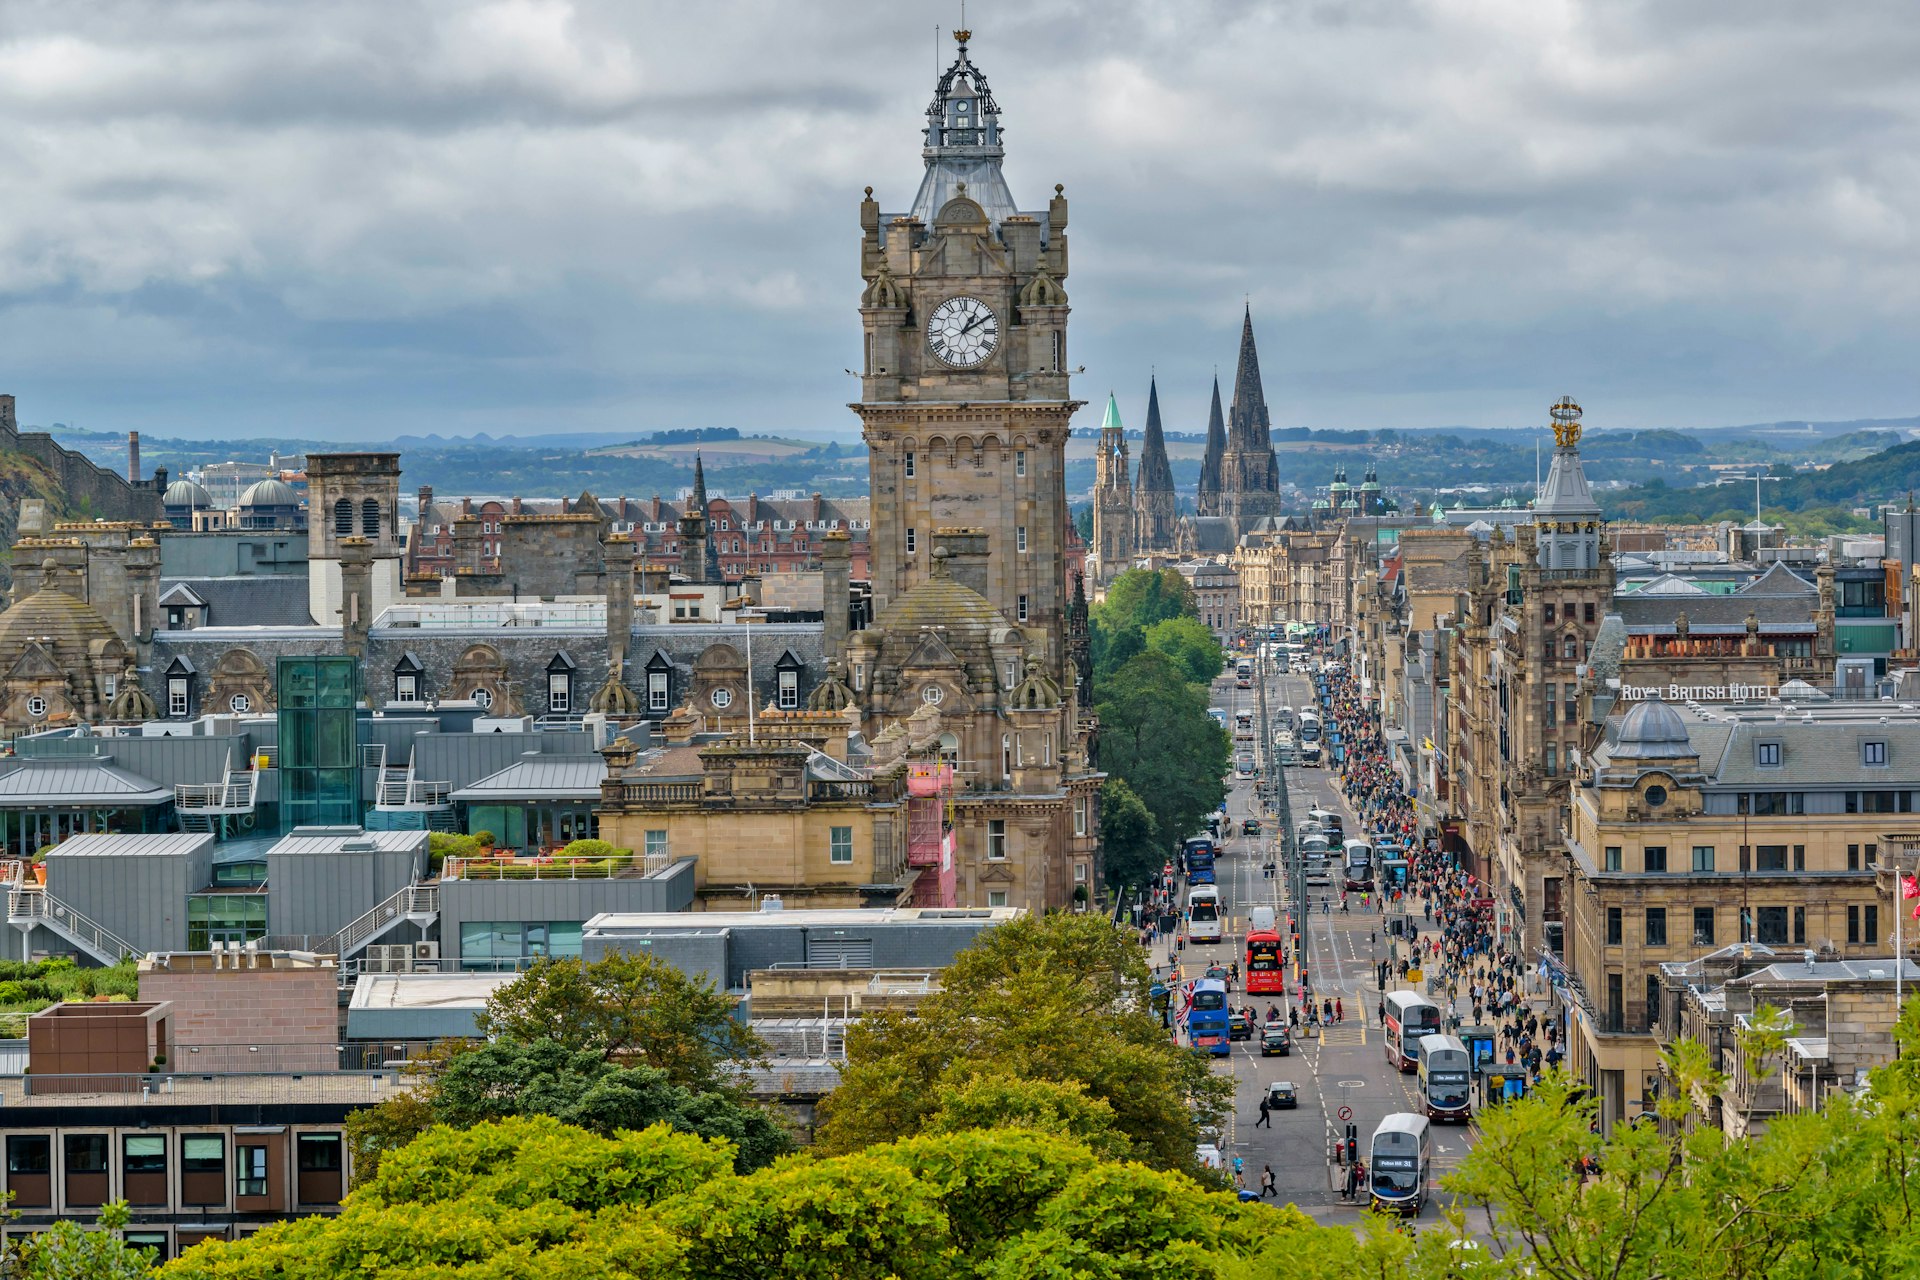 The Balmoral Hotel clock tower stands above on Princess street in Edinburgh with a queue of traffic, including a red bus, making its way along the street to the green hills in the background